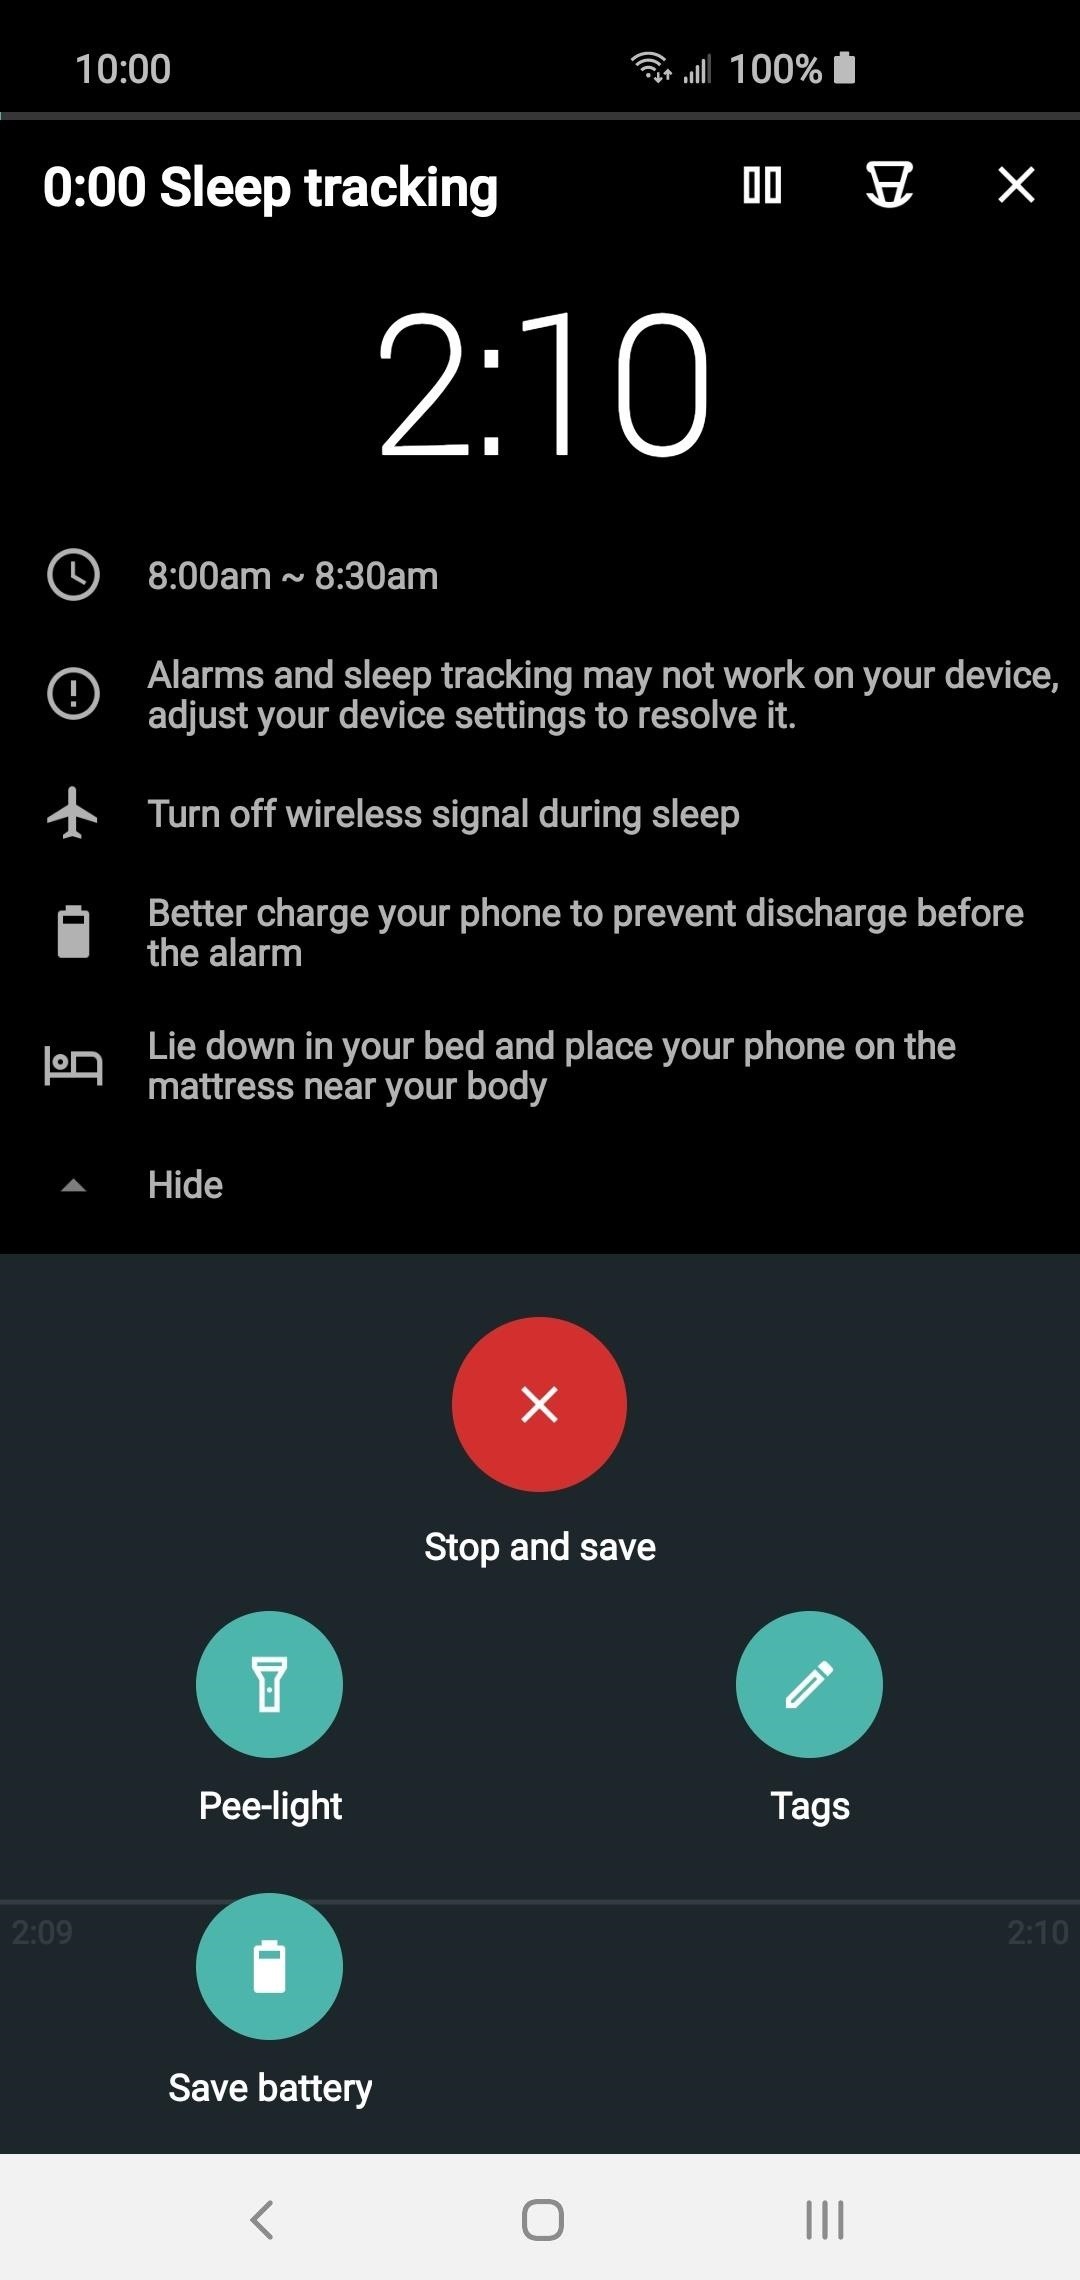 How to Track Your Sleeping Habits with Google Fit